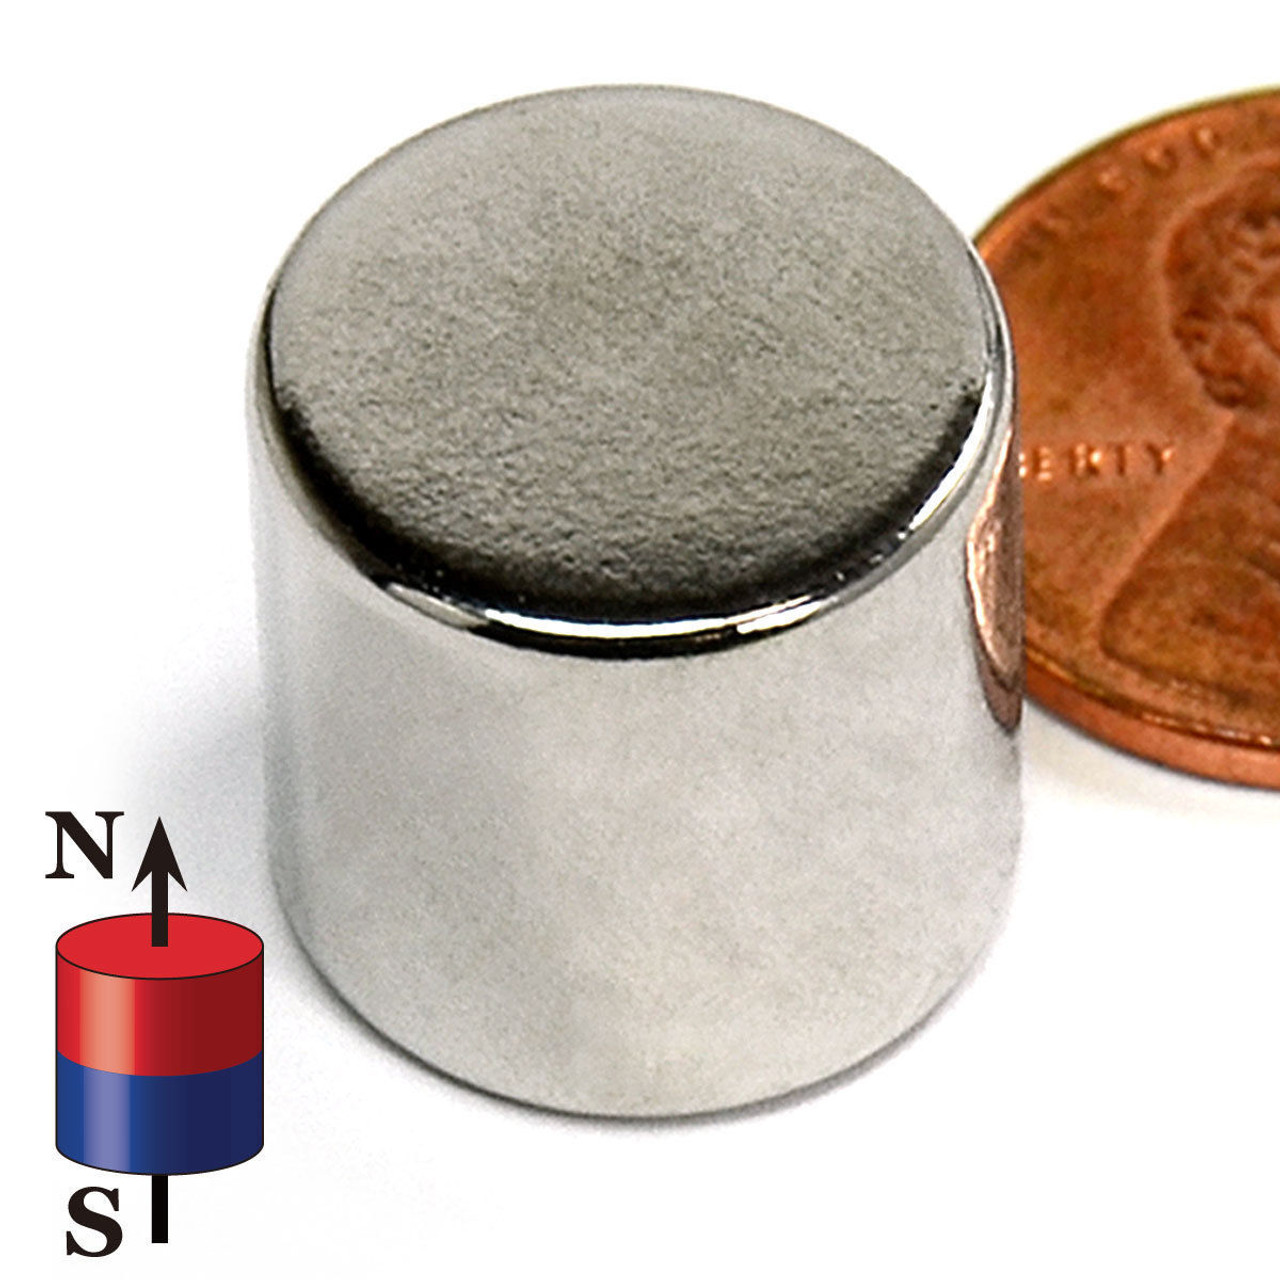 main picture of a magnet next to a penny and the pole indicator neatly placed on the lower left of the magnet to make sure that you know which pole is which